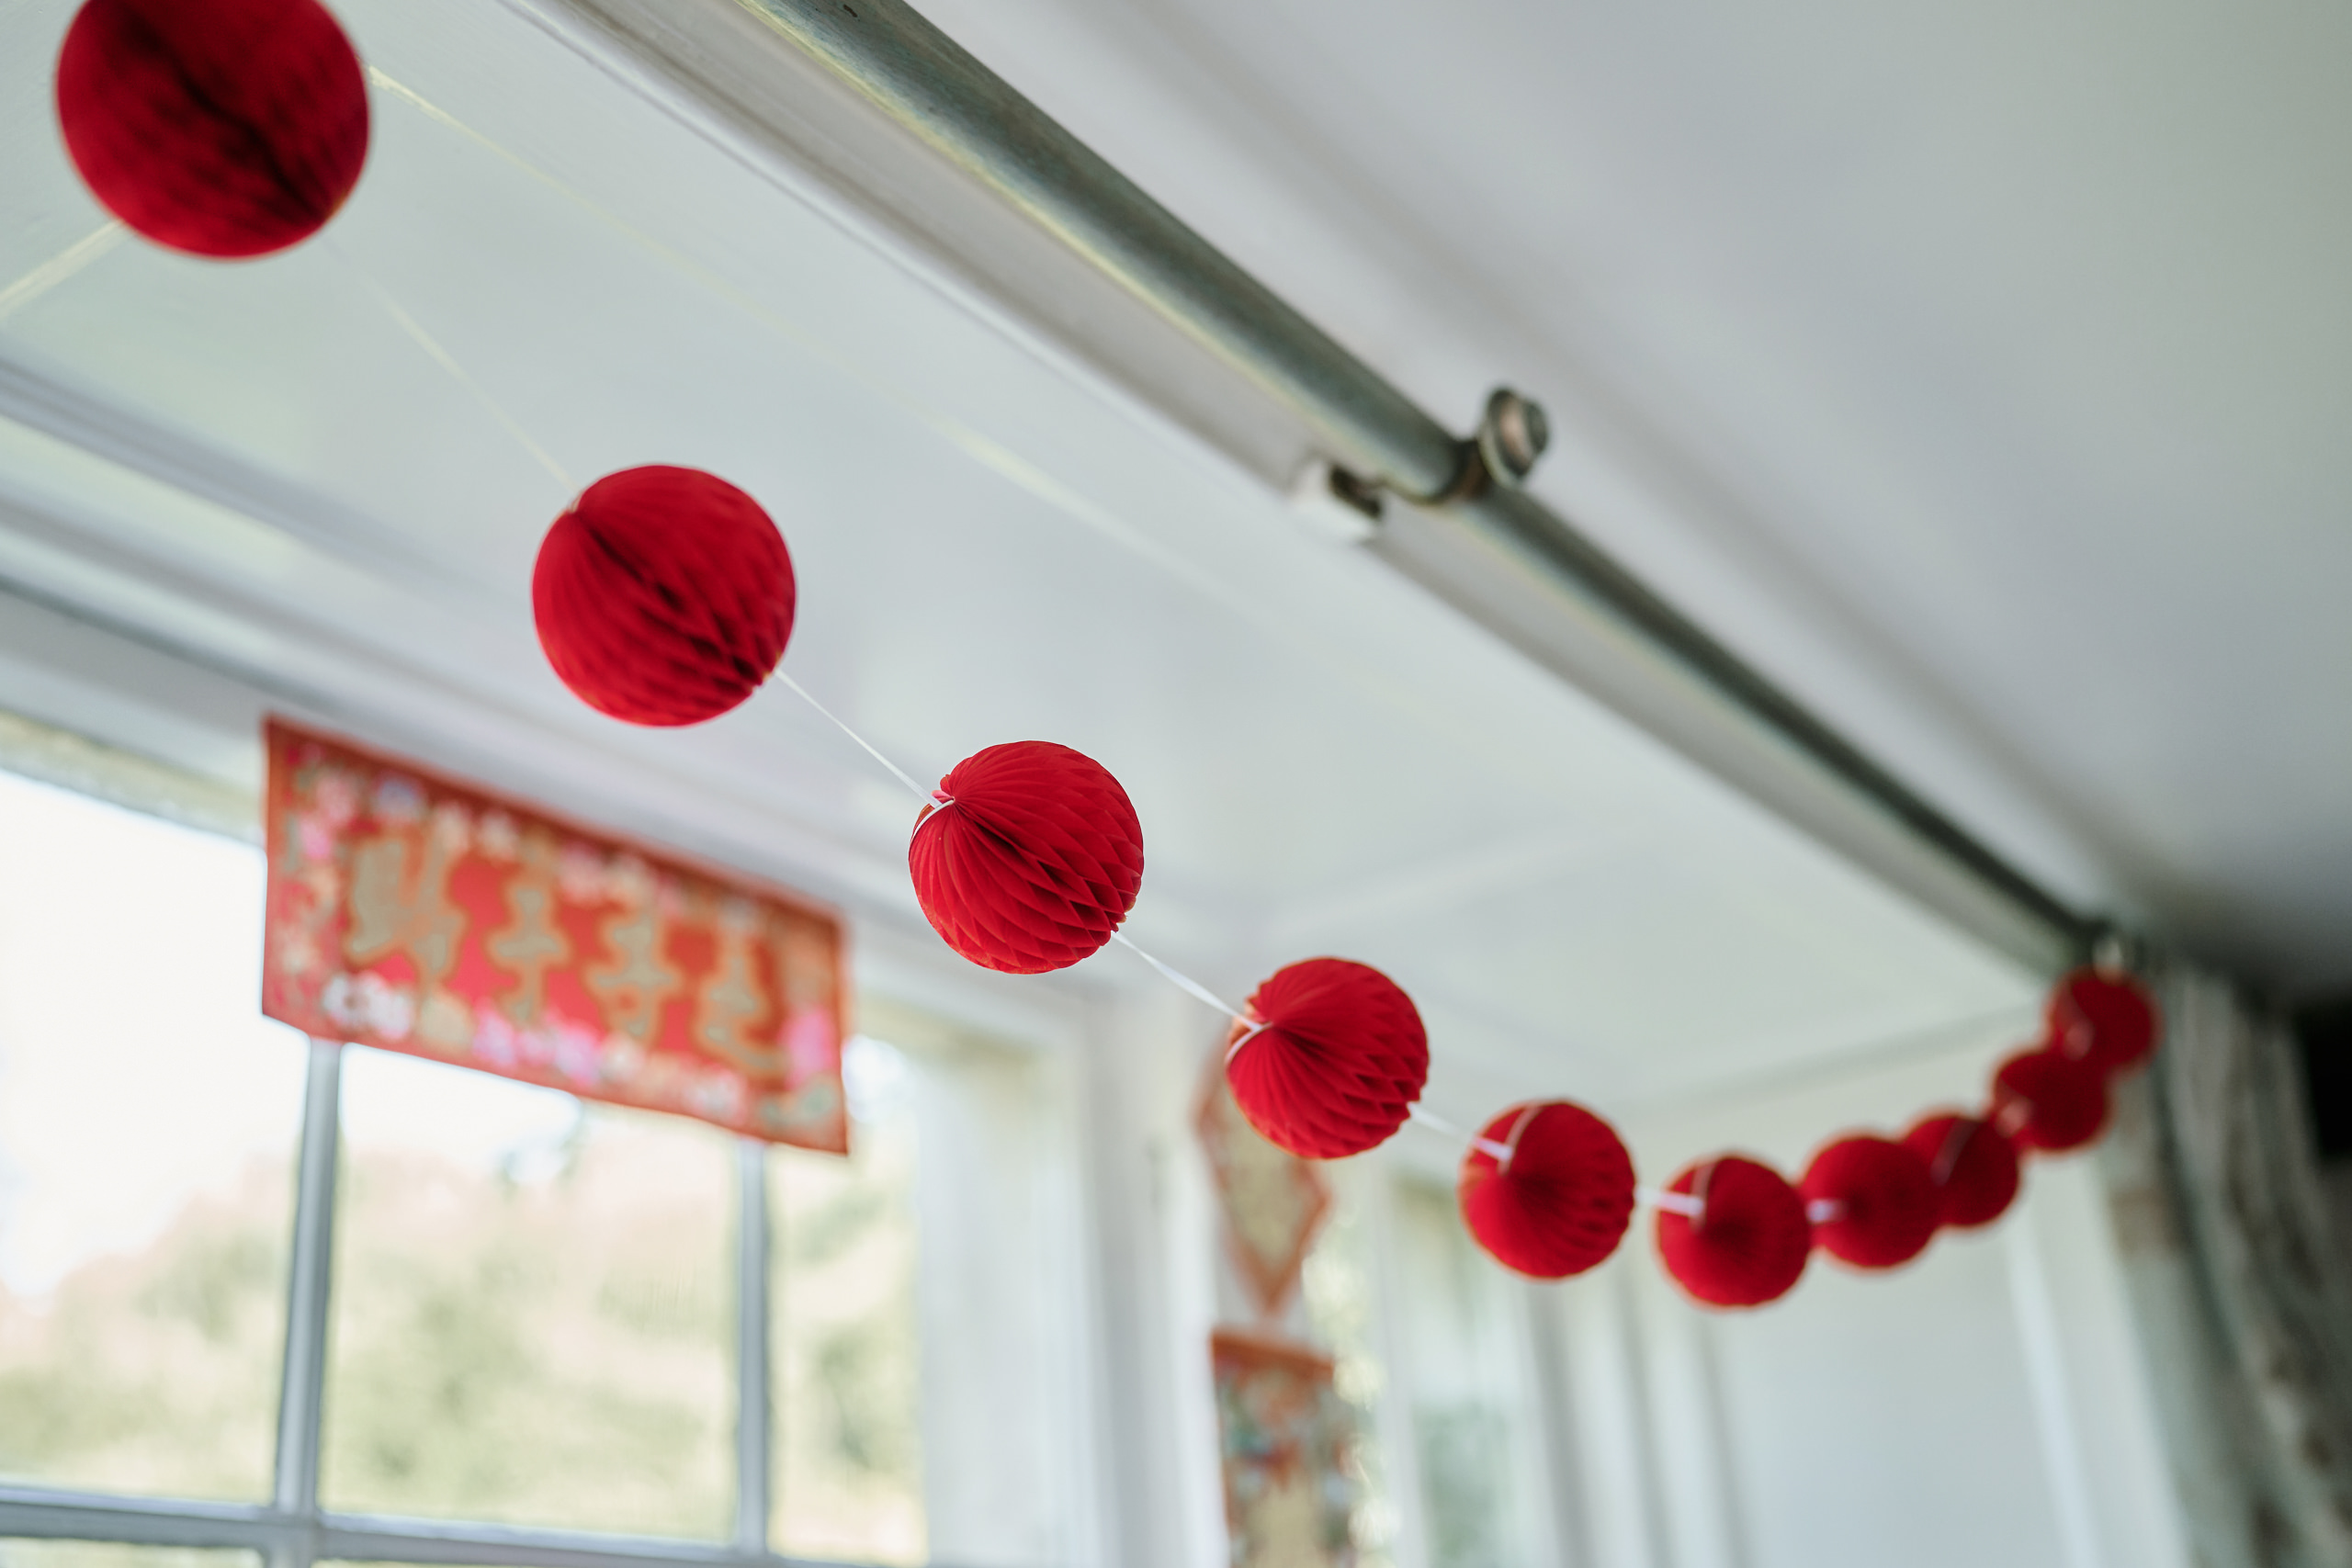 There's a string of red paper decorations hanging from a window.